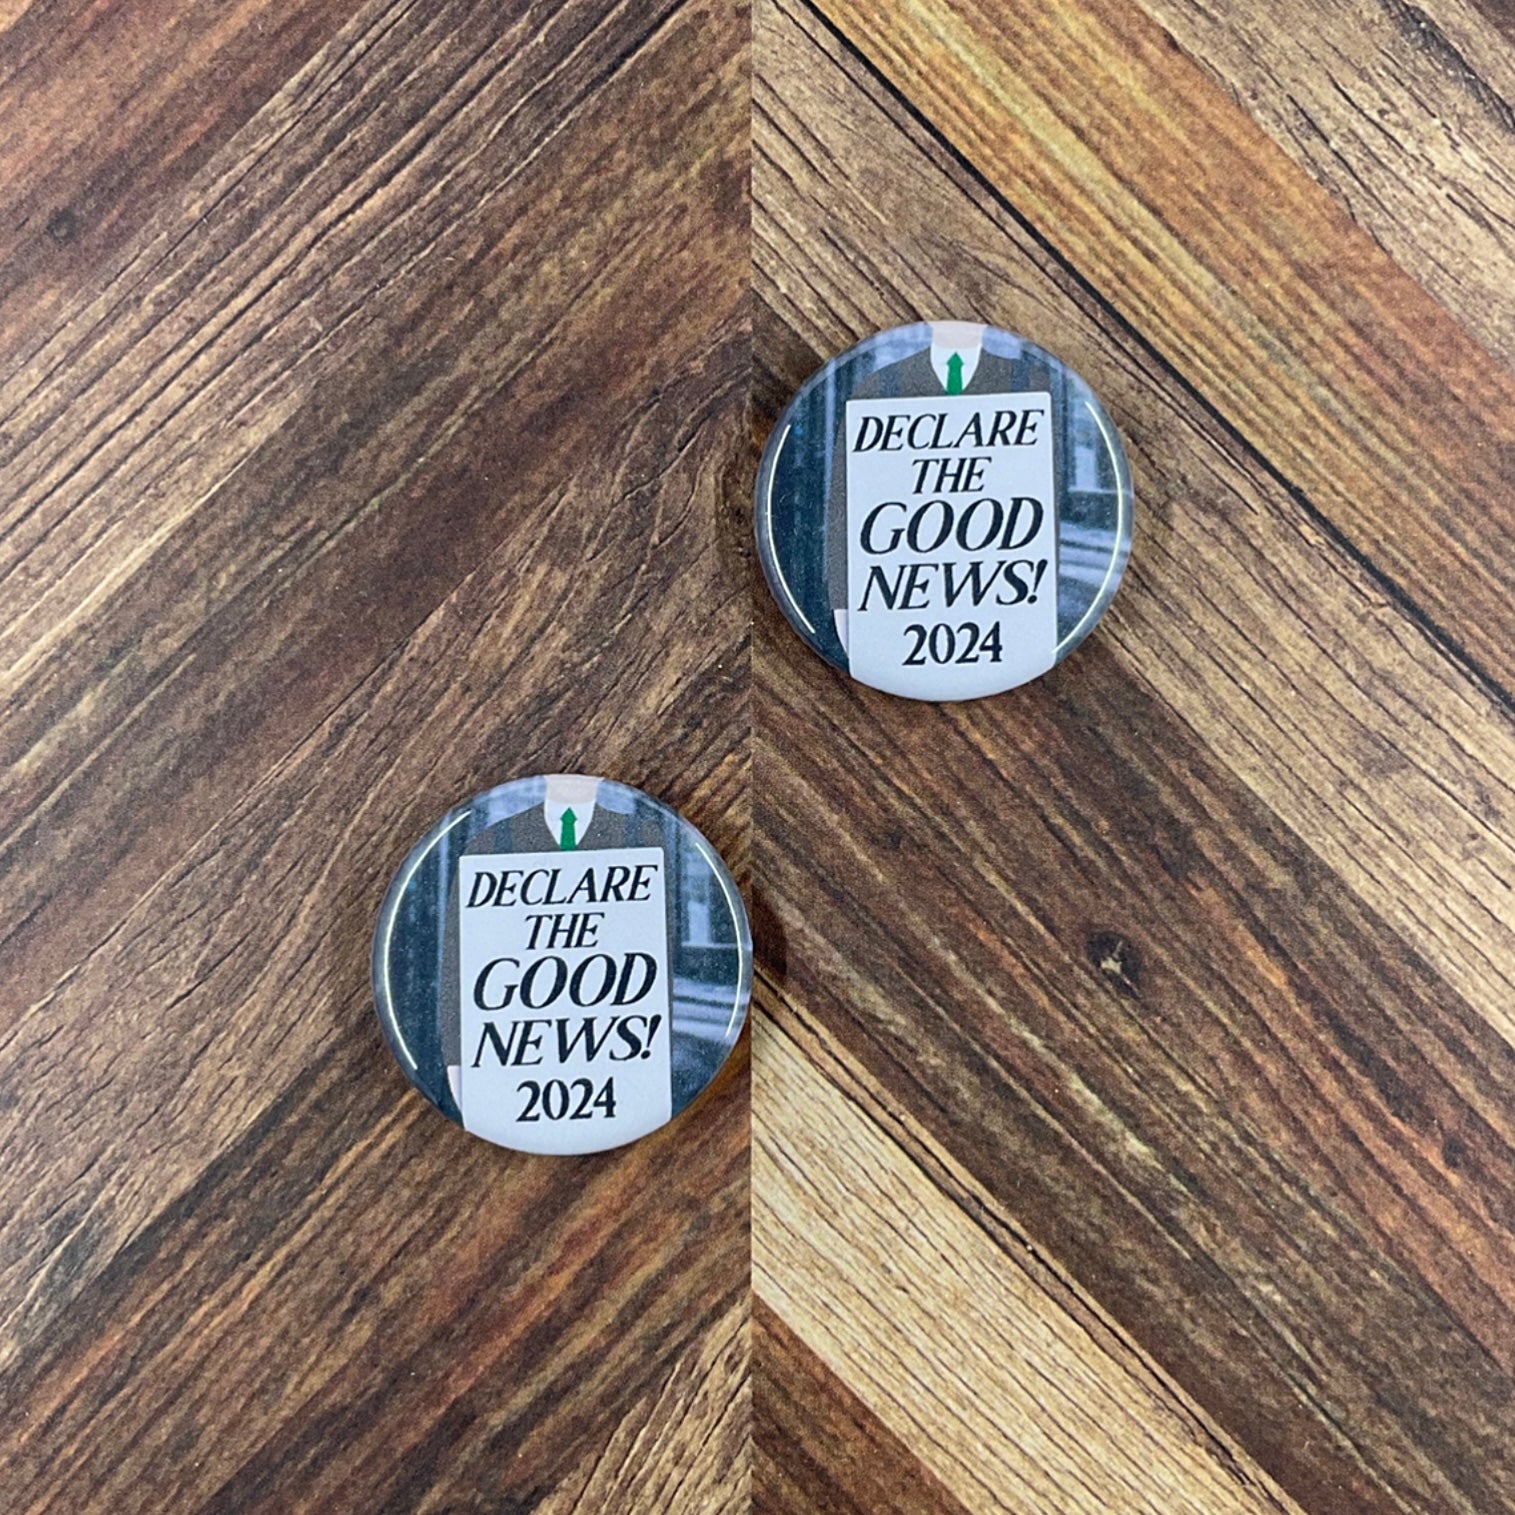 2024 Declare the Good News JW Convention Gifts Special Convention 2024 Sandwich Board Button Pin Gifts Magnet